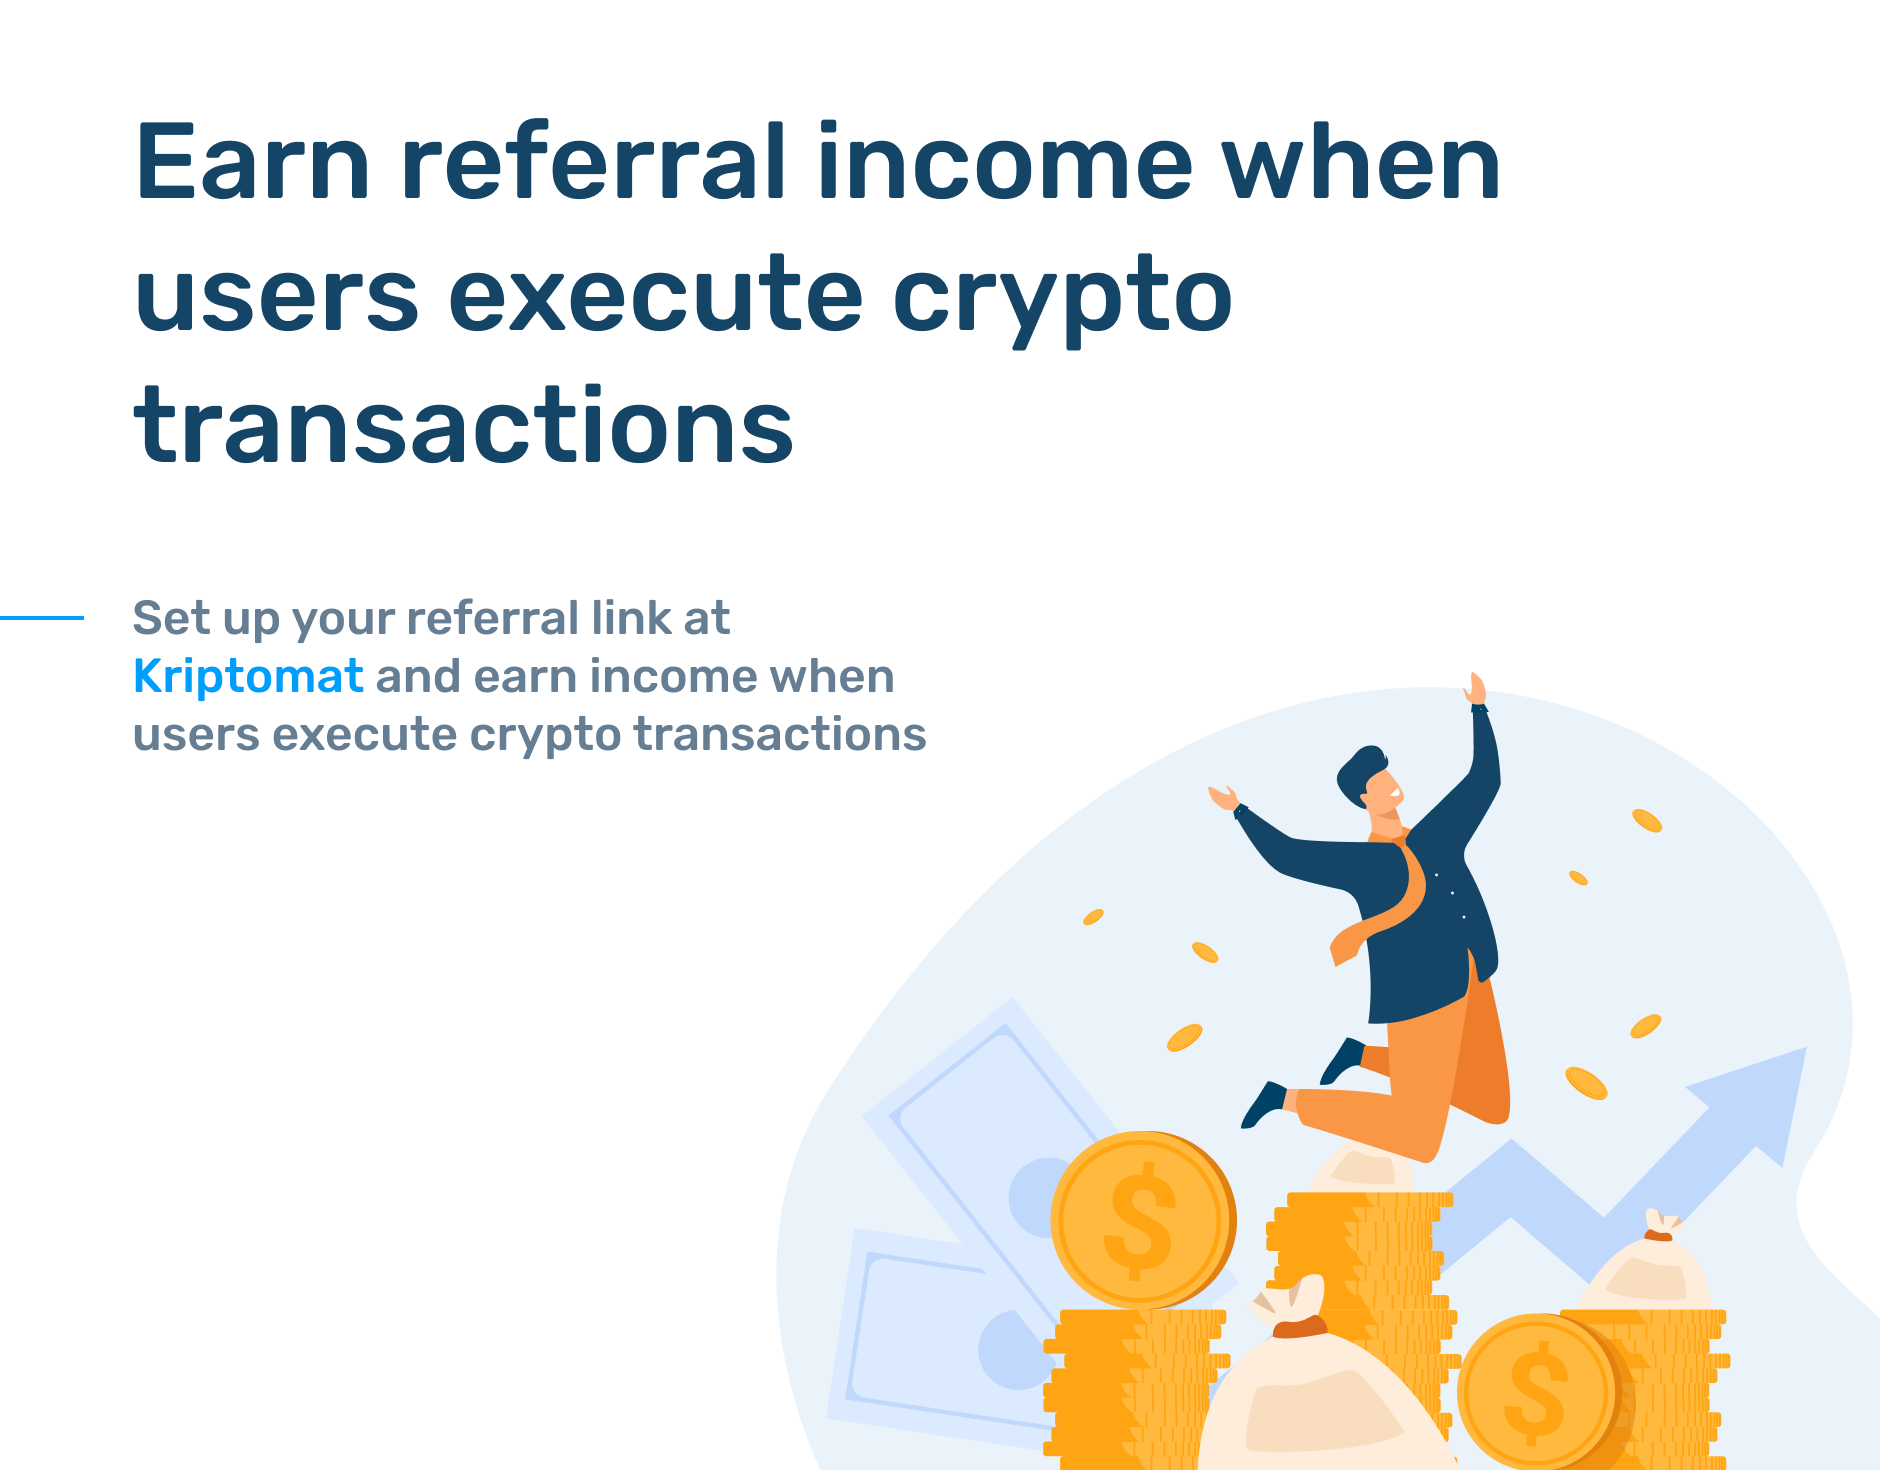 Earn referral income when new users execute crypto transactions